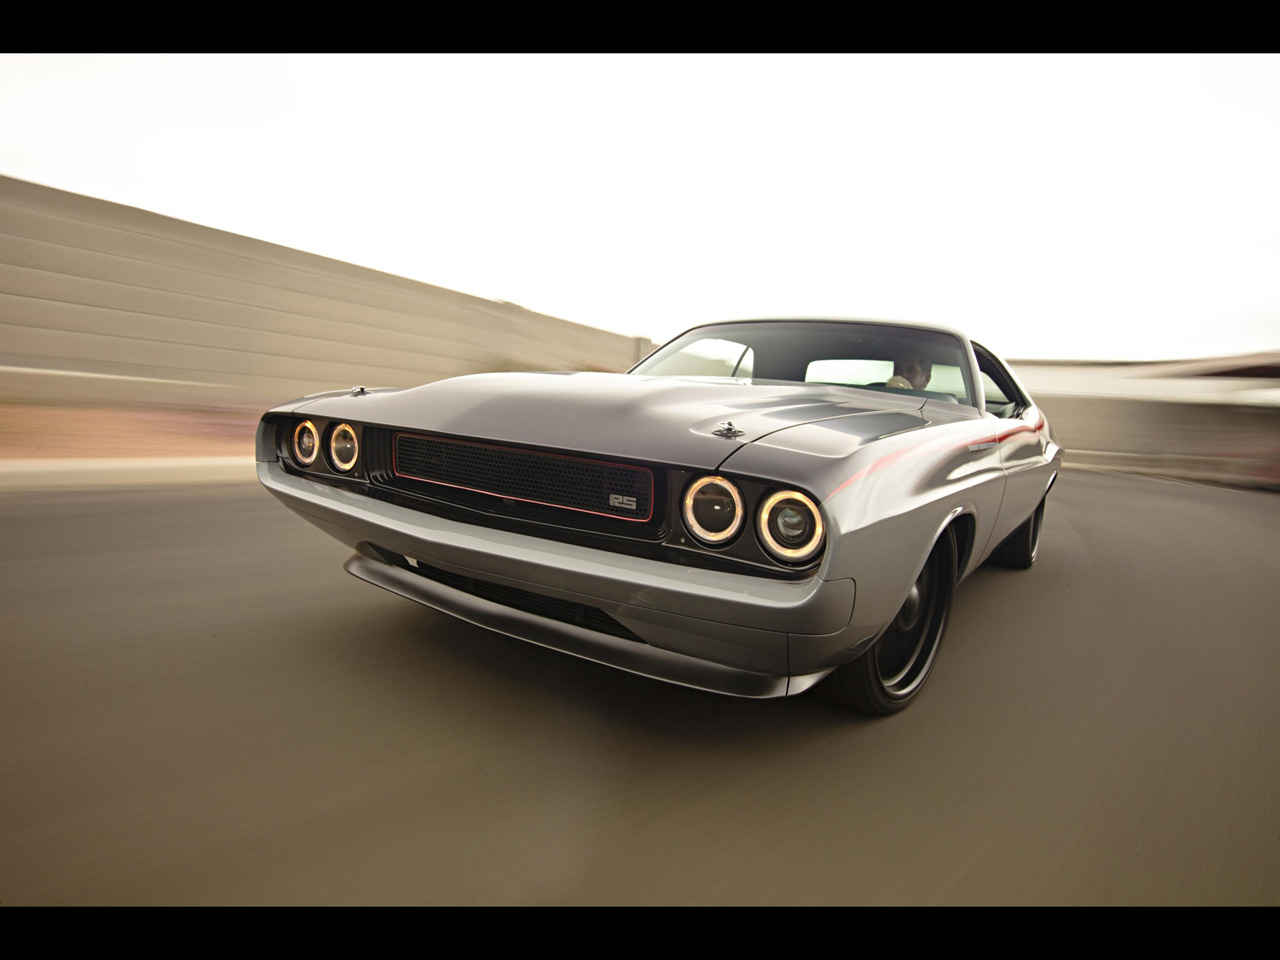 1970-Dodge-Challenger-by-Roadster-Shop-Front-Angle-Speed-1280x960.jpg